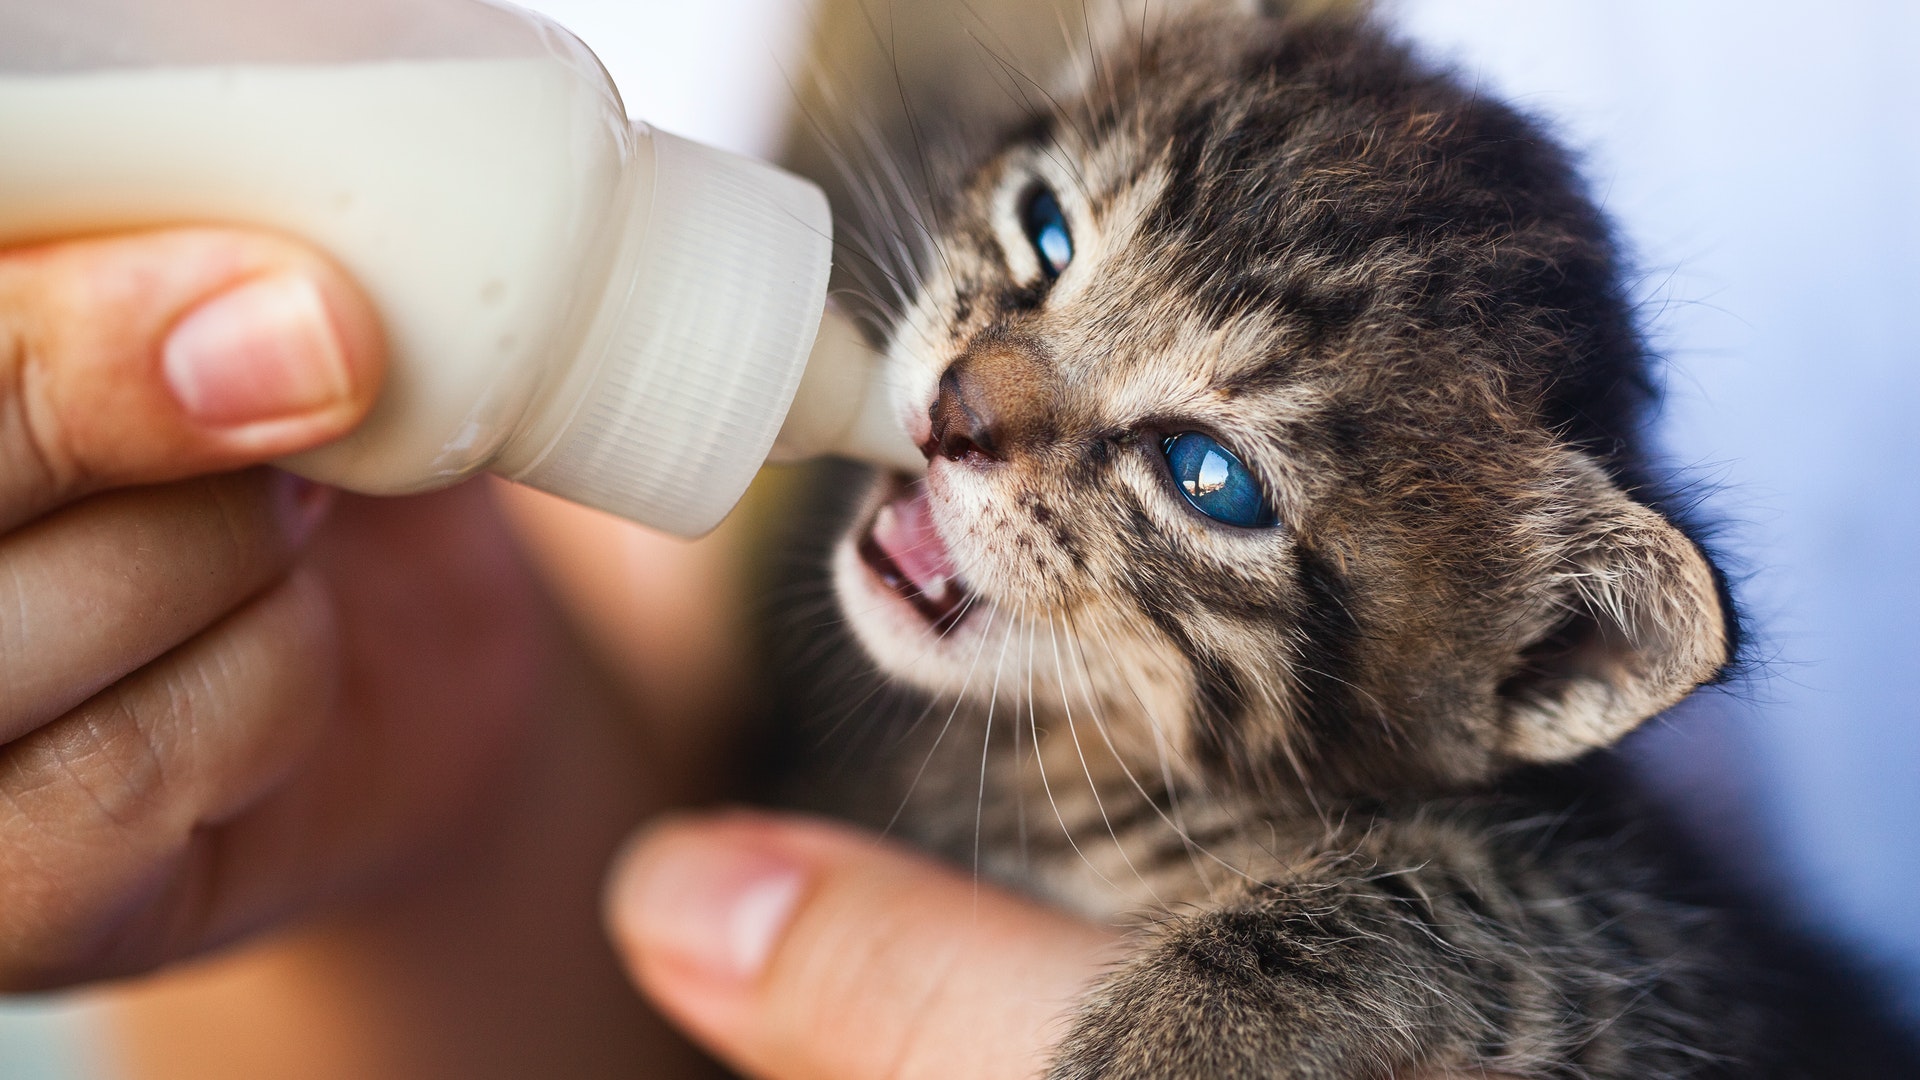 A Person Feeding a Kitten with Bottle